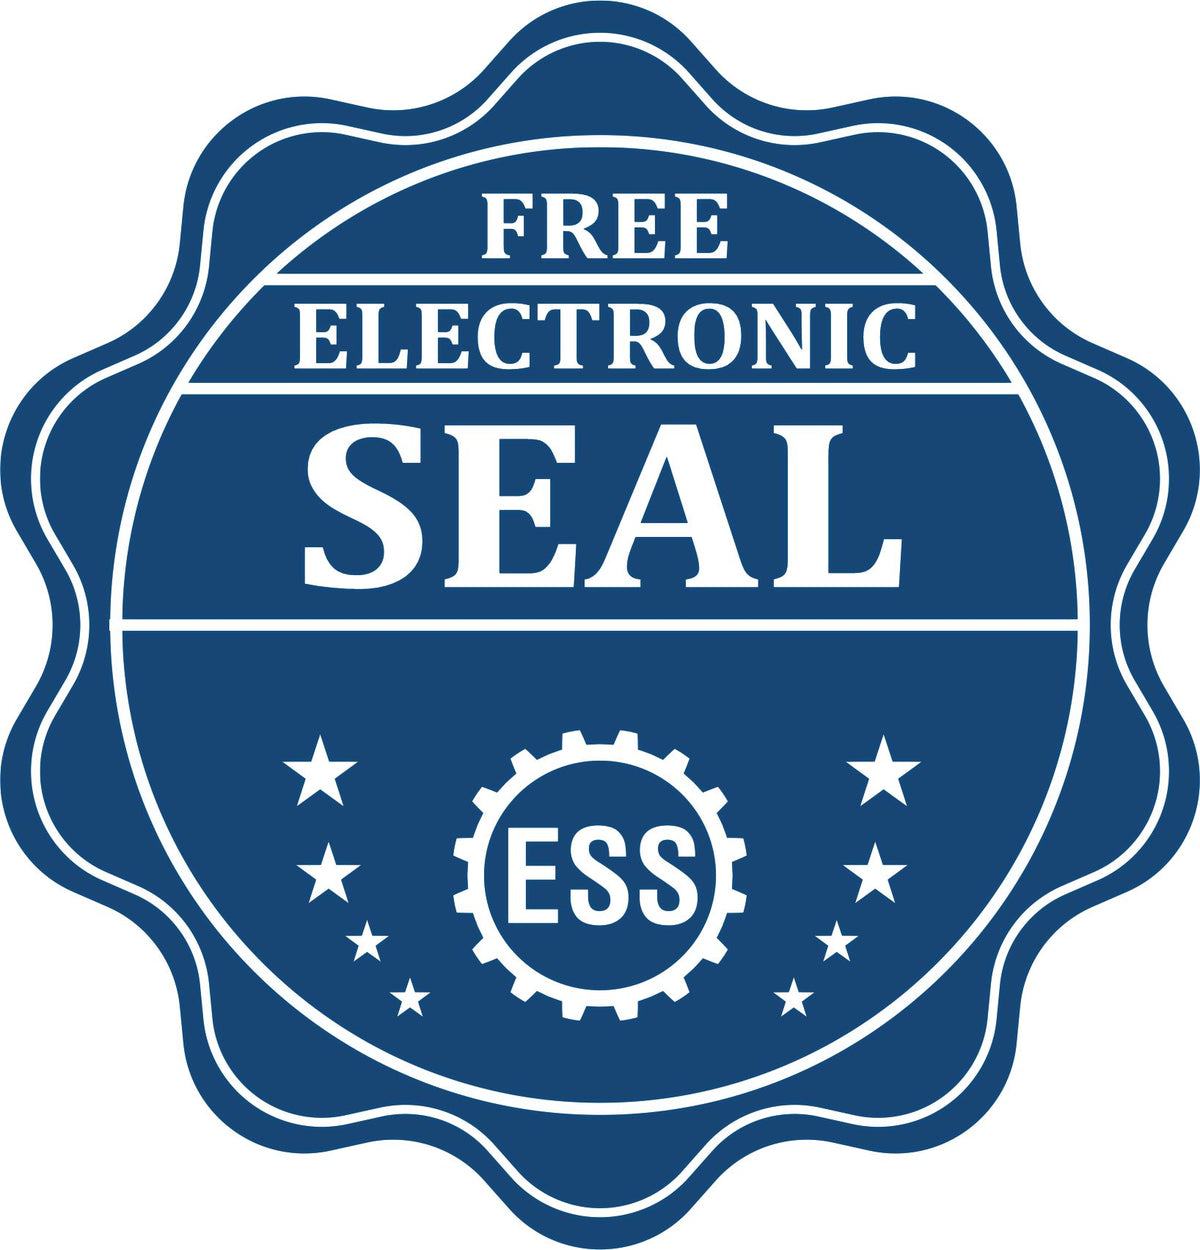 A badge showing a free electronic seal for the Soft Kentucky Professional Geologist Seal with stars and the ESS gear on the emblem.